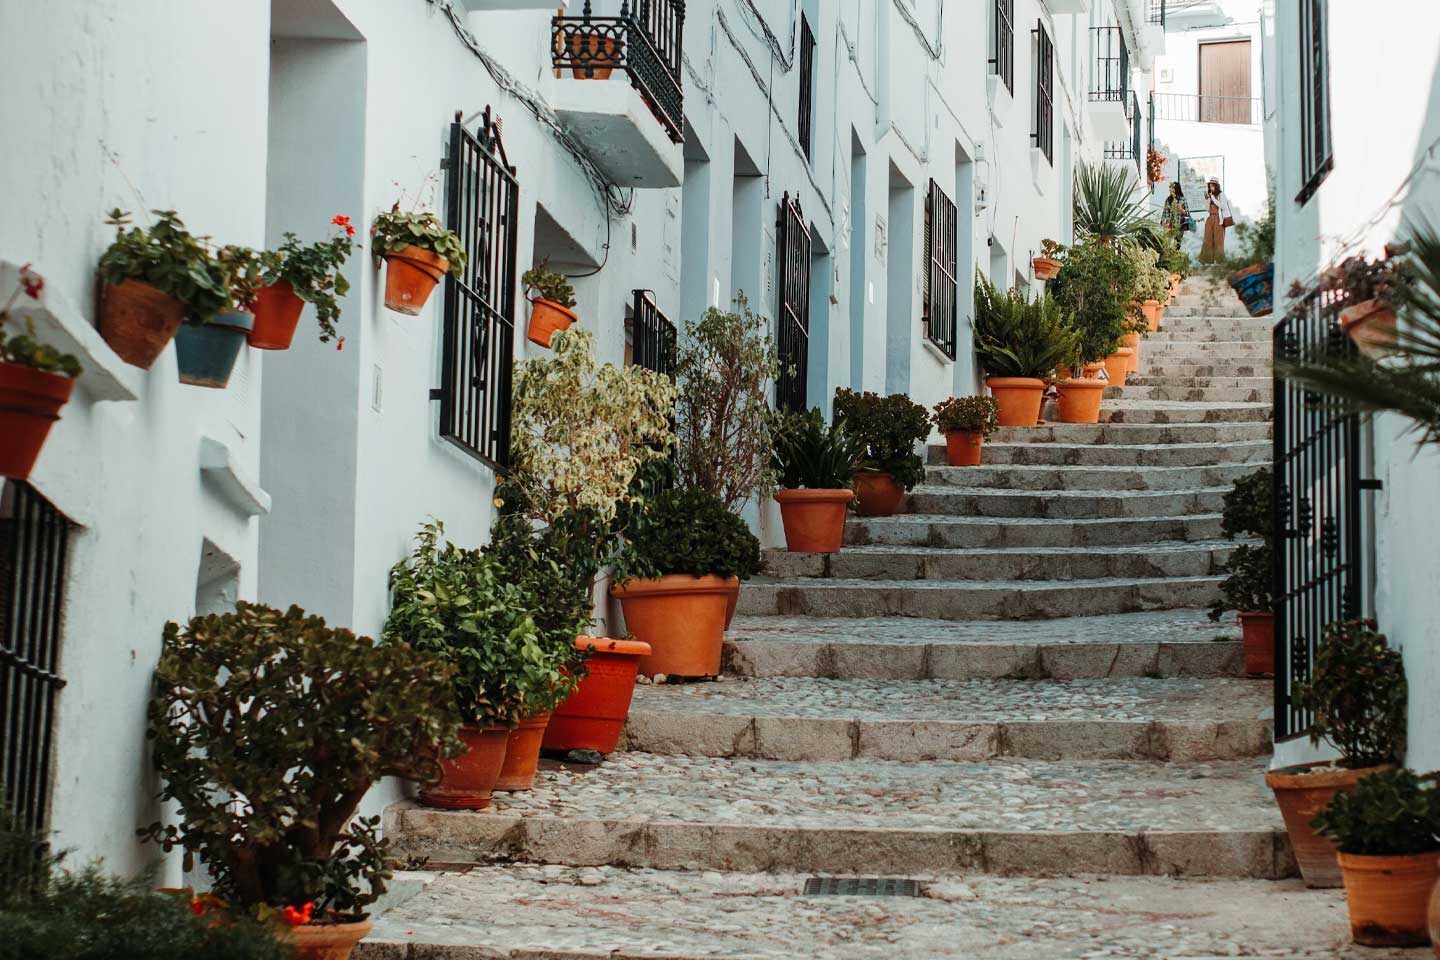 rows-of-plants-on-stairs-in-frigiliana